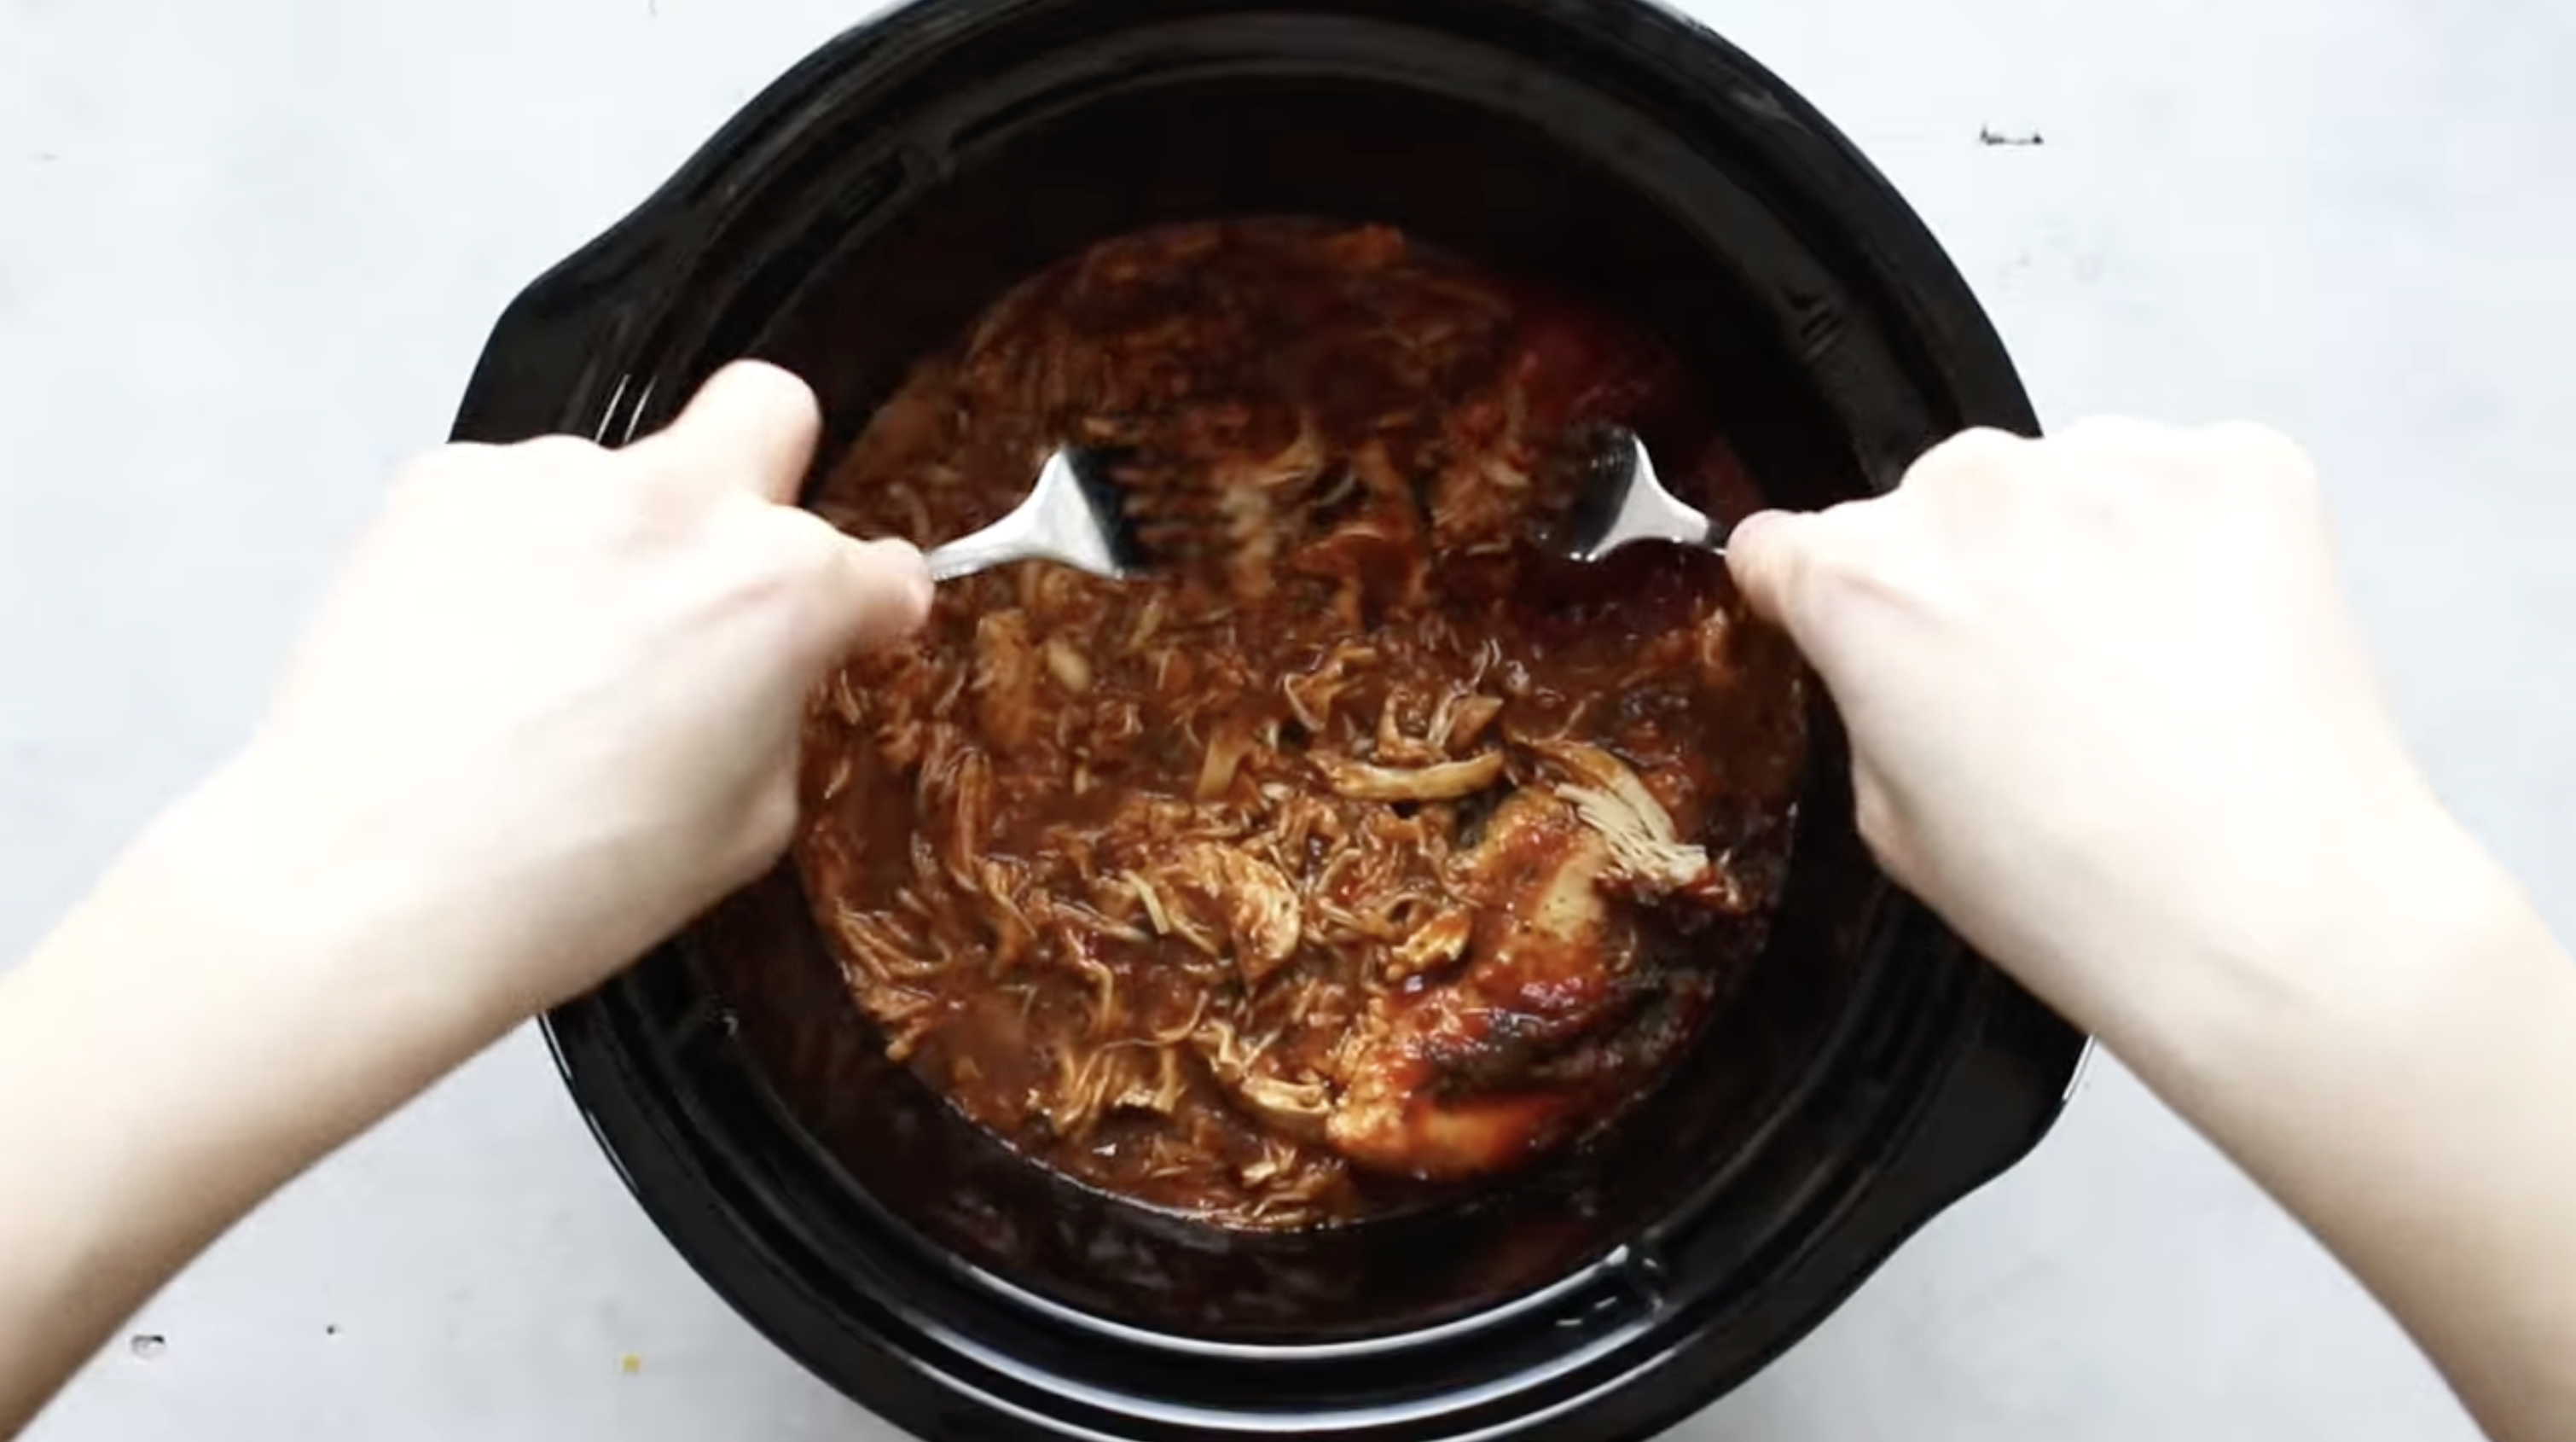 https://www.thecookierookie.com/wp-content/uploads/2019/01/crockpot-buffalo-chicken-how-to-2.png